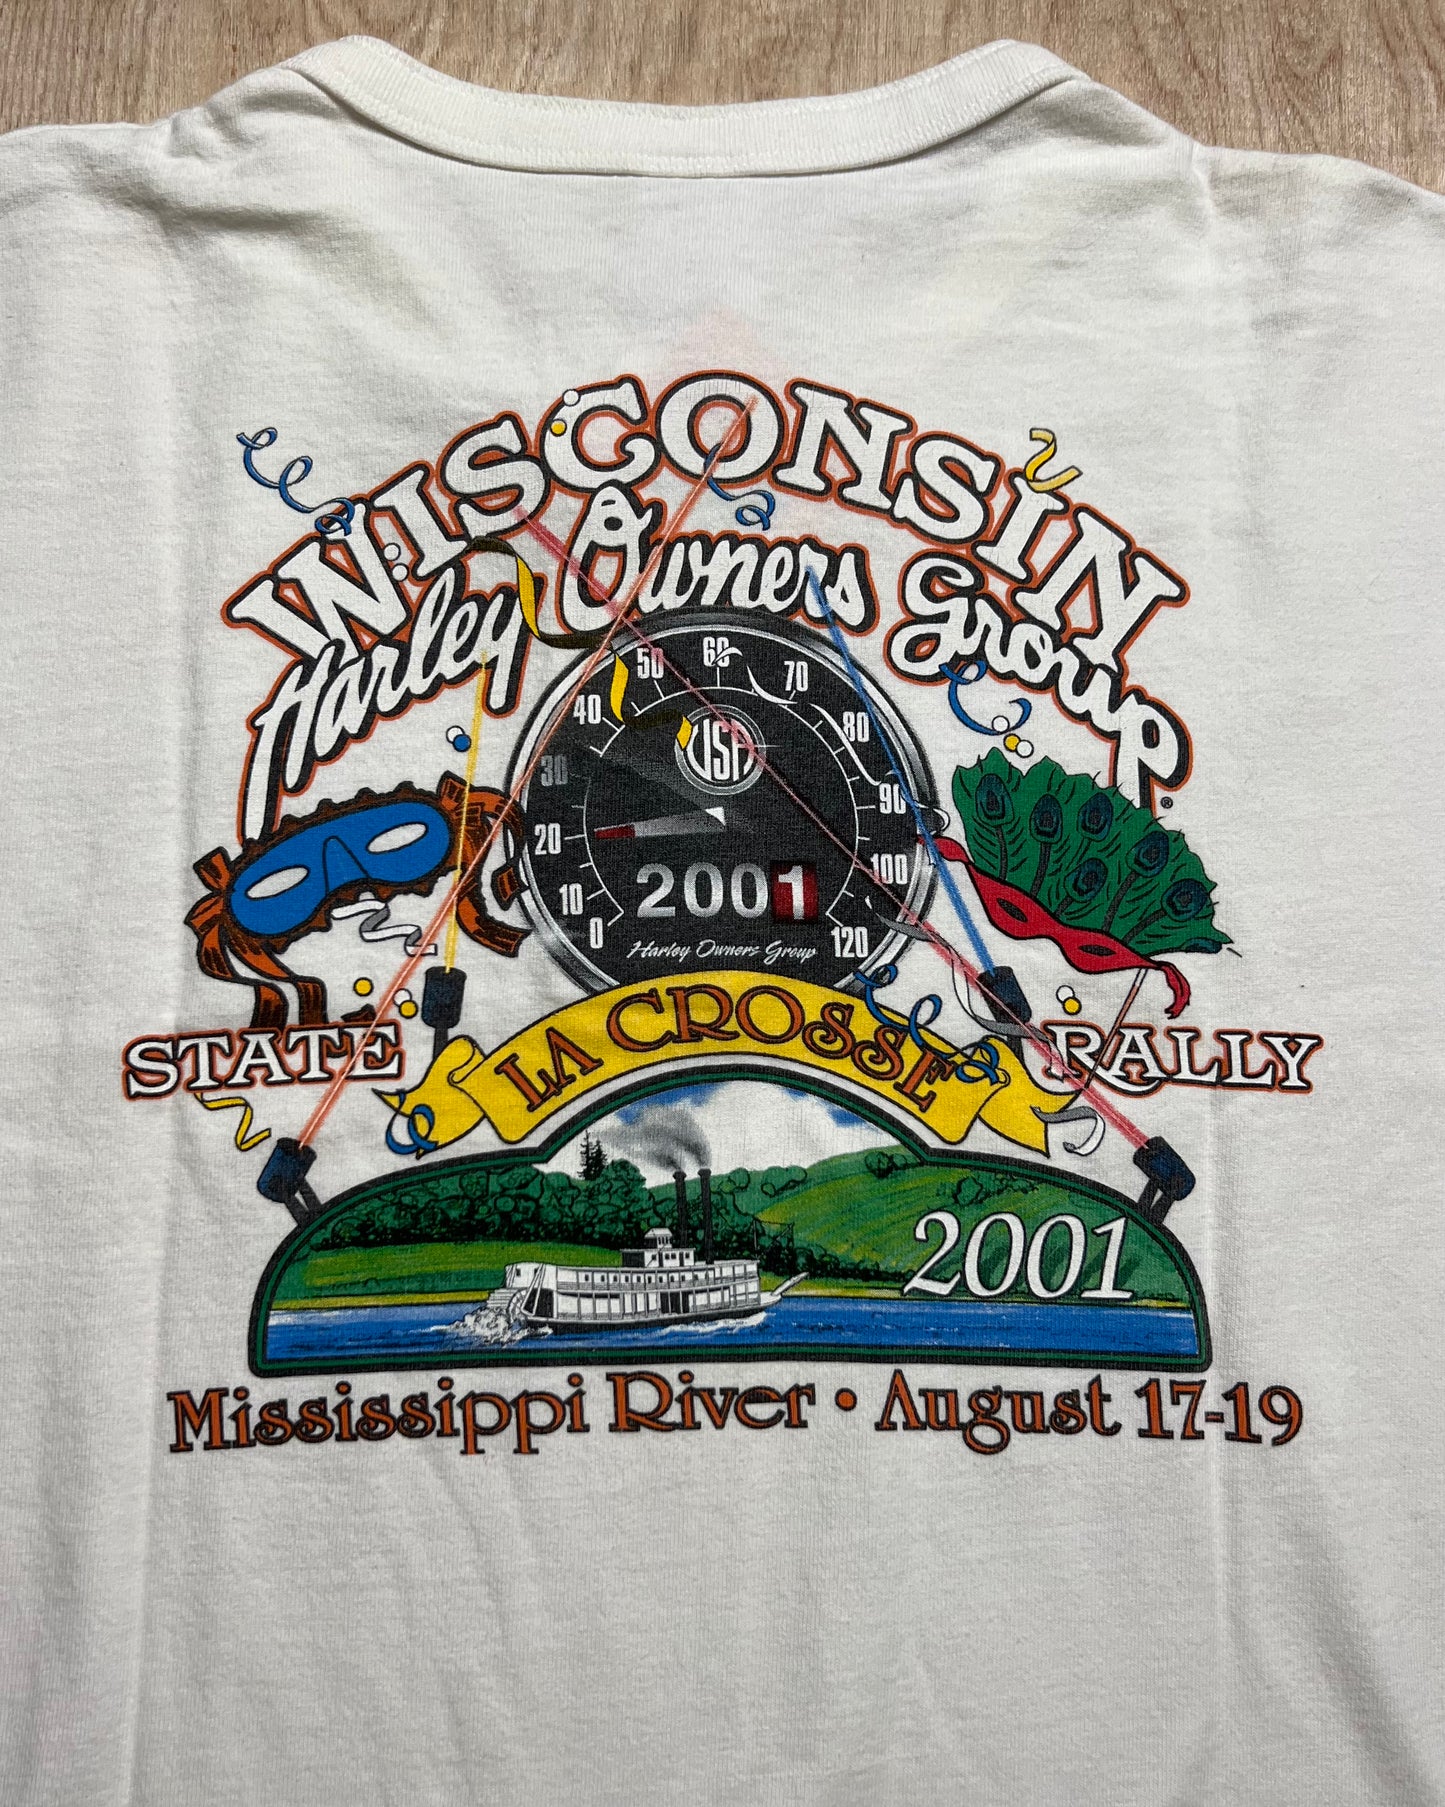 2001 Wisconsin Harley Owners Group La Crosse State Rally T-Shirt